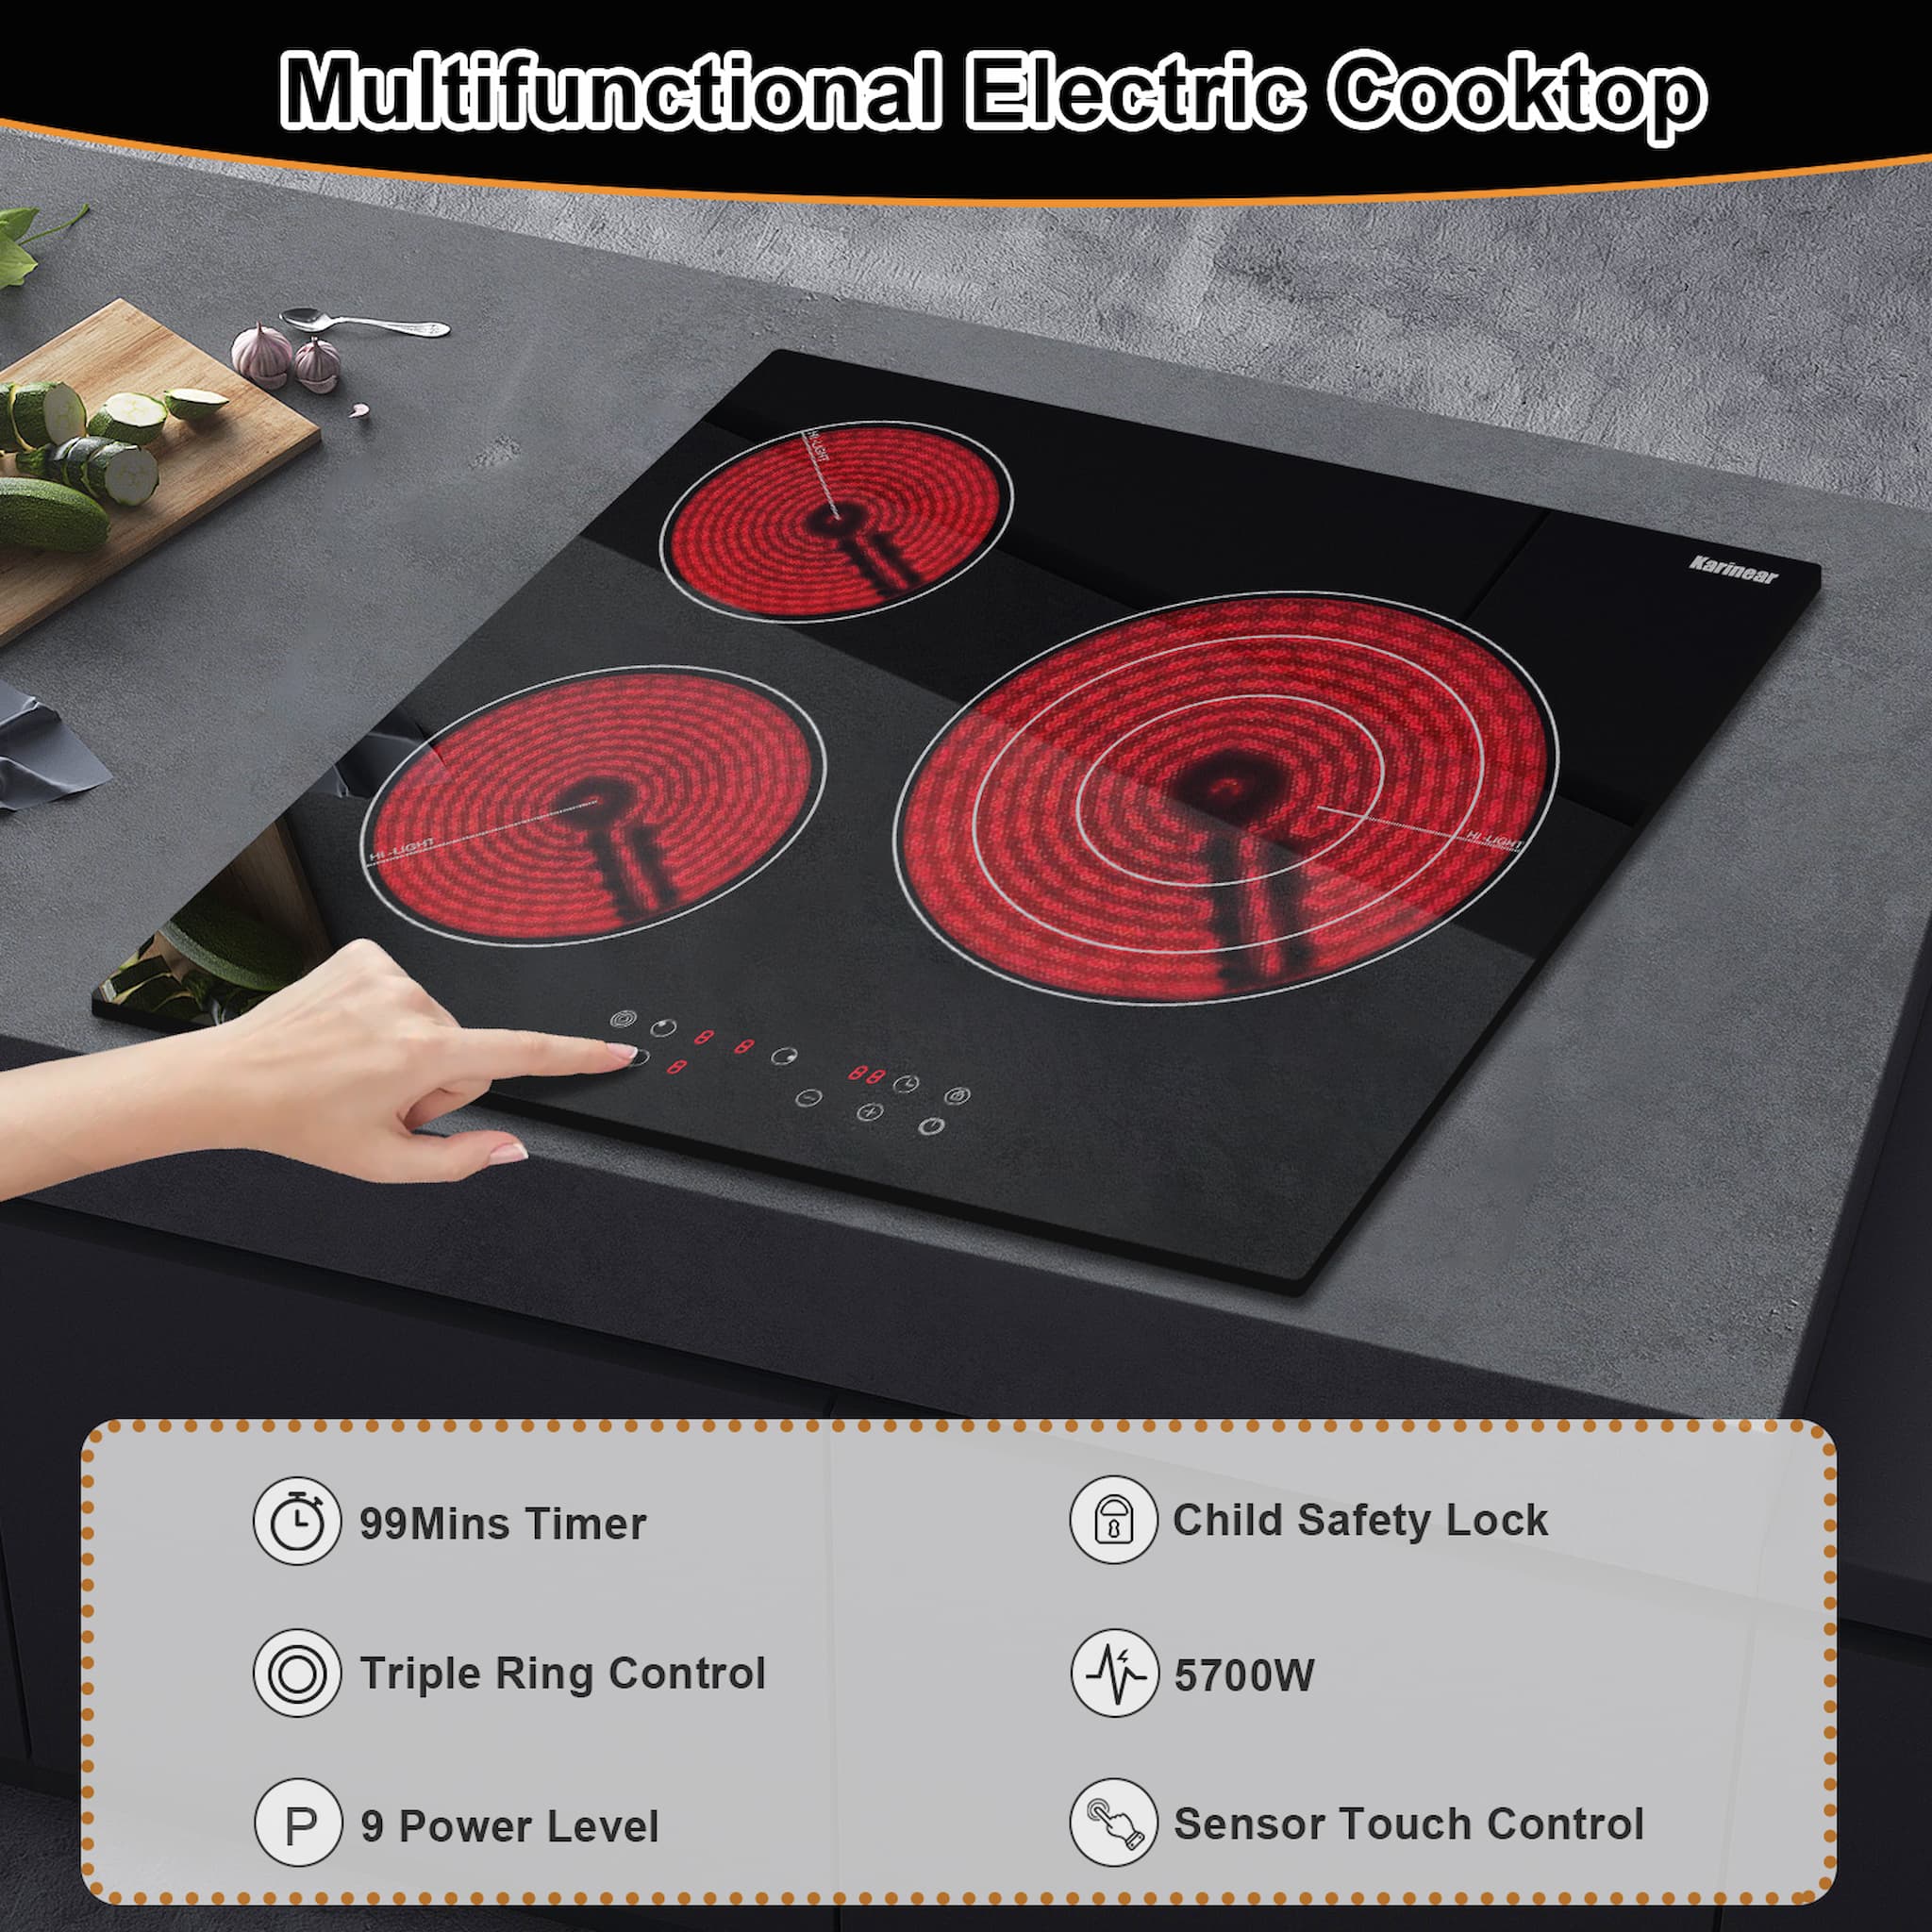 Karinear Electric Ceramic Cooktop 24 Inch Product Features Sensor touch control  9 Power setting  0-99 mins Timer  Auto switch off  Residual heat indicator  Child Safety Lock  Over-Temperature Protection  3 powerful burner: 1200W+1800W+ 750W/1650W/2700W(3 ring)